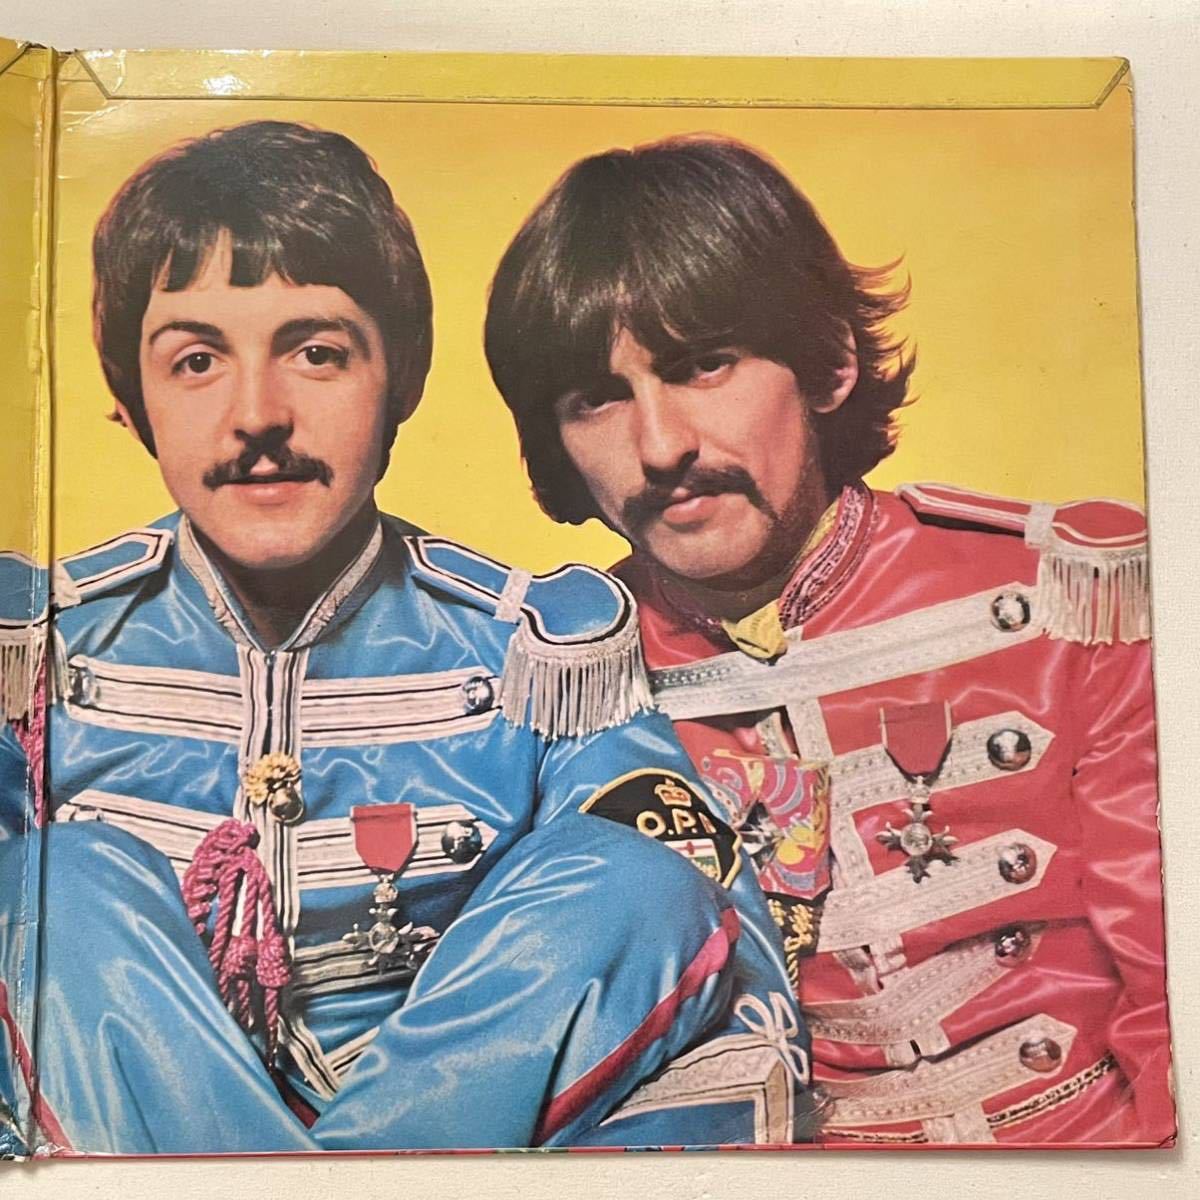 1stプレス完品 特集記事付 UKorg MONO LP THE BEATLES SGT. PEPPERS LONELY HEARTS CLUB BAND UKオリジナル盤 PMC7027 ビートルズ レコード_画像4